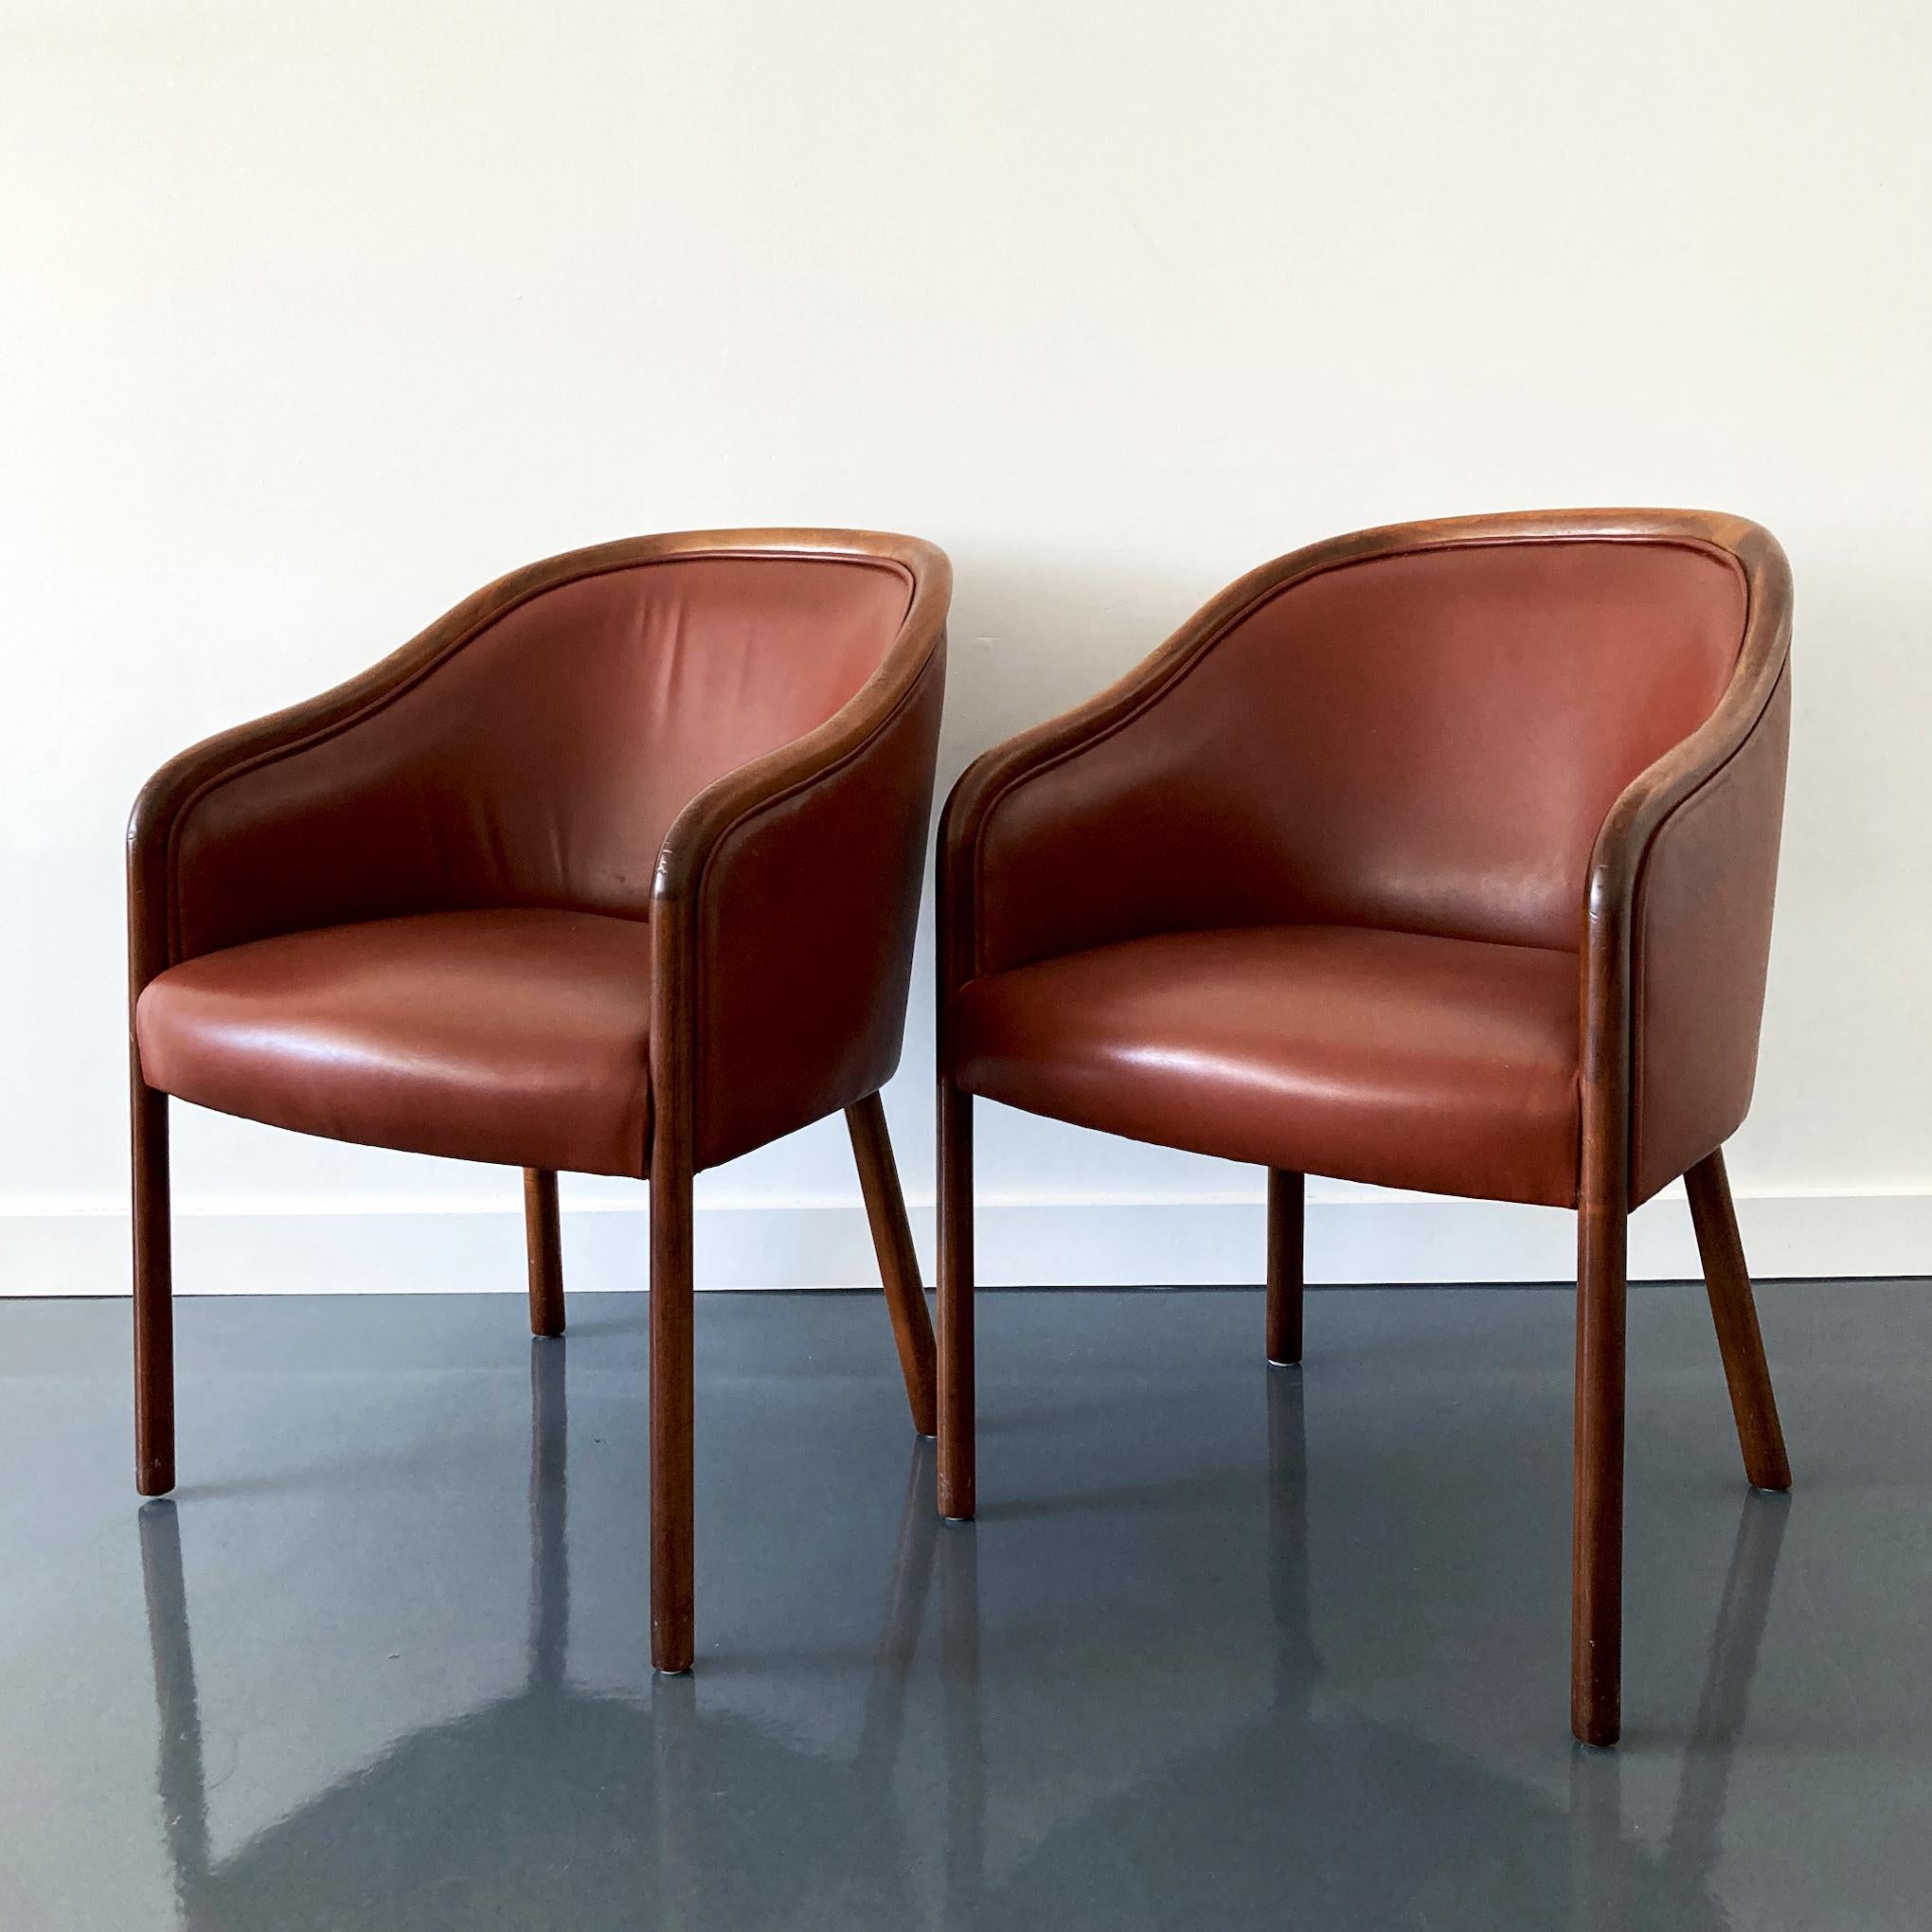 Designed by Ward Bennett for Brickel Associates, elegant leather armchairs. Made from ash wood and stained in a walnut finish, upholstered in burgundy leather. Stunning pair of chairs, leather is in good condition. The chairs are structurally sound